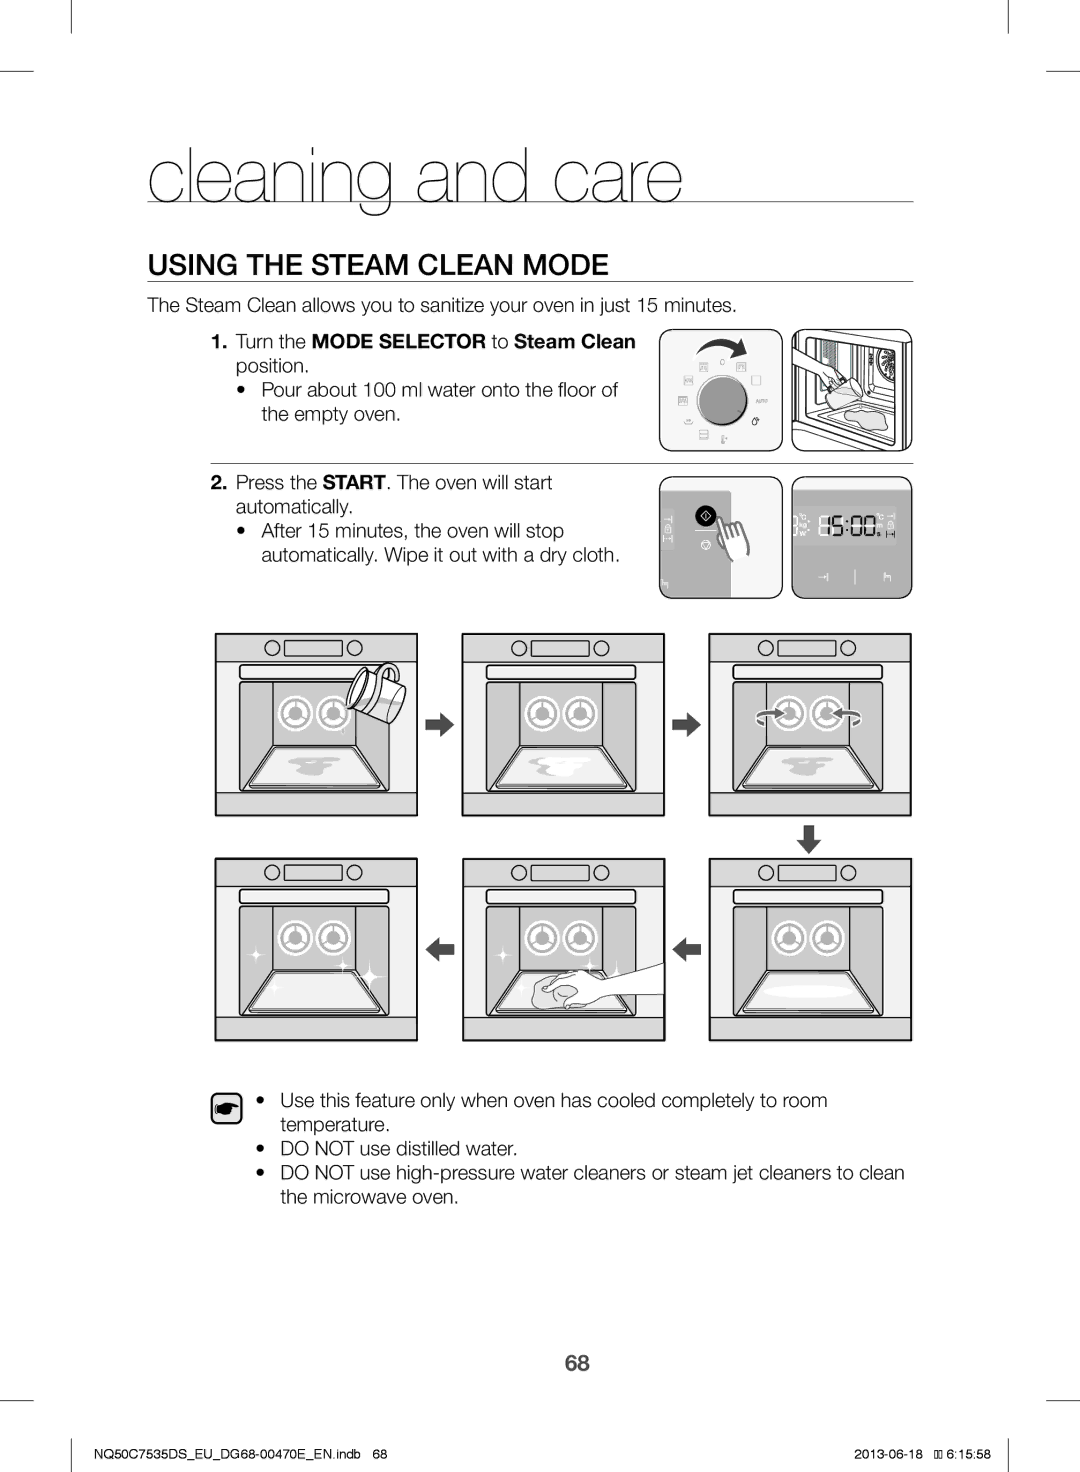 Samsung NQ50C7535DS/EU manual Using the Steam Clean Mode, Turn the Mode Selector to Steam Clean position 